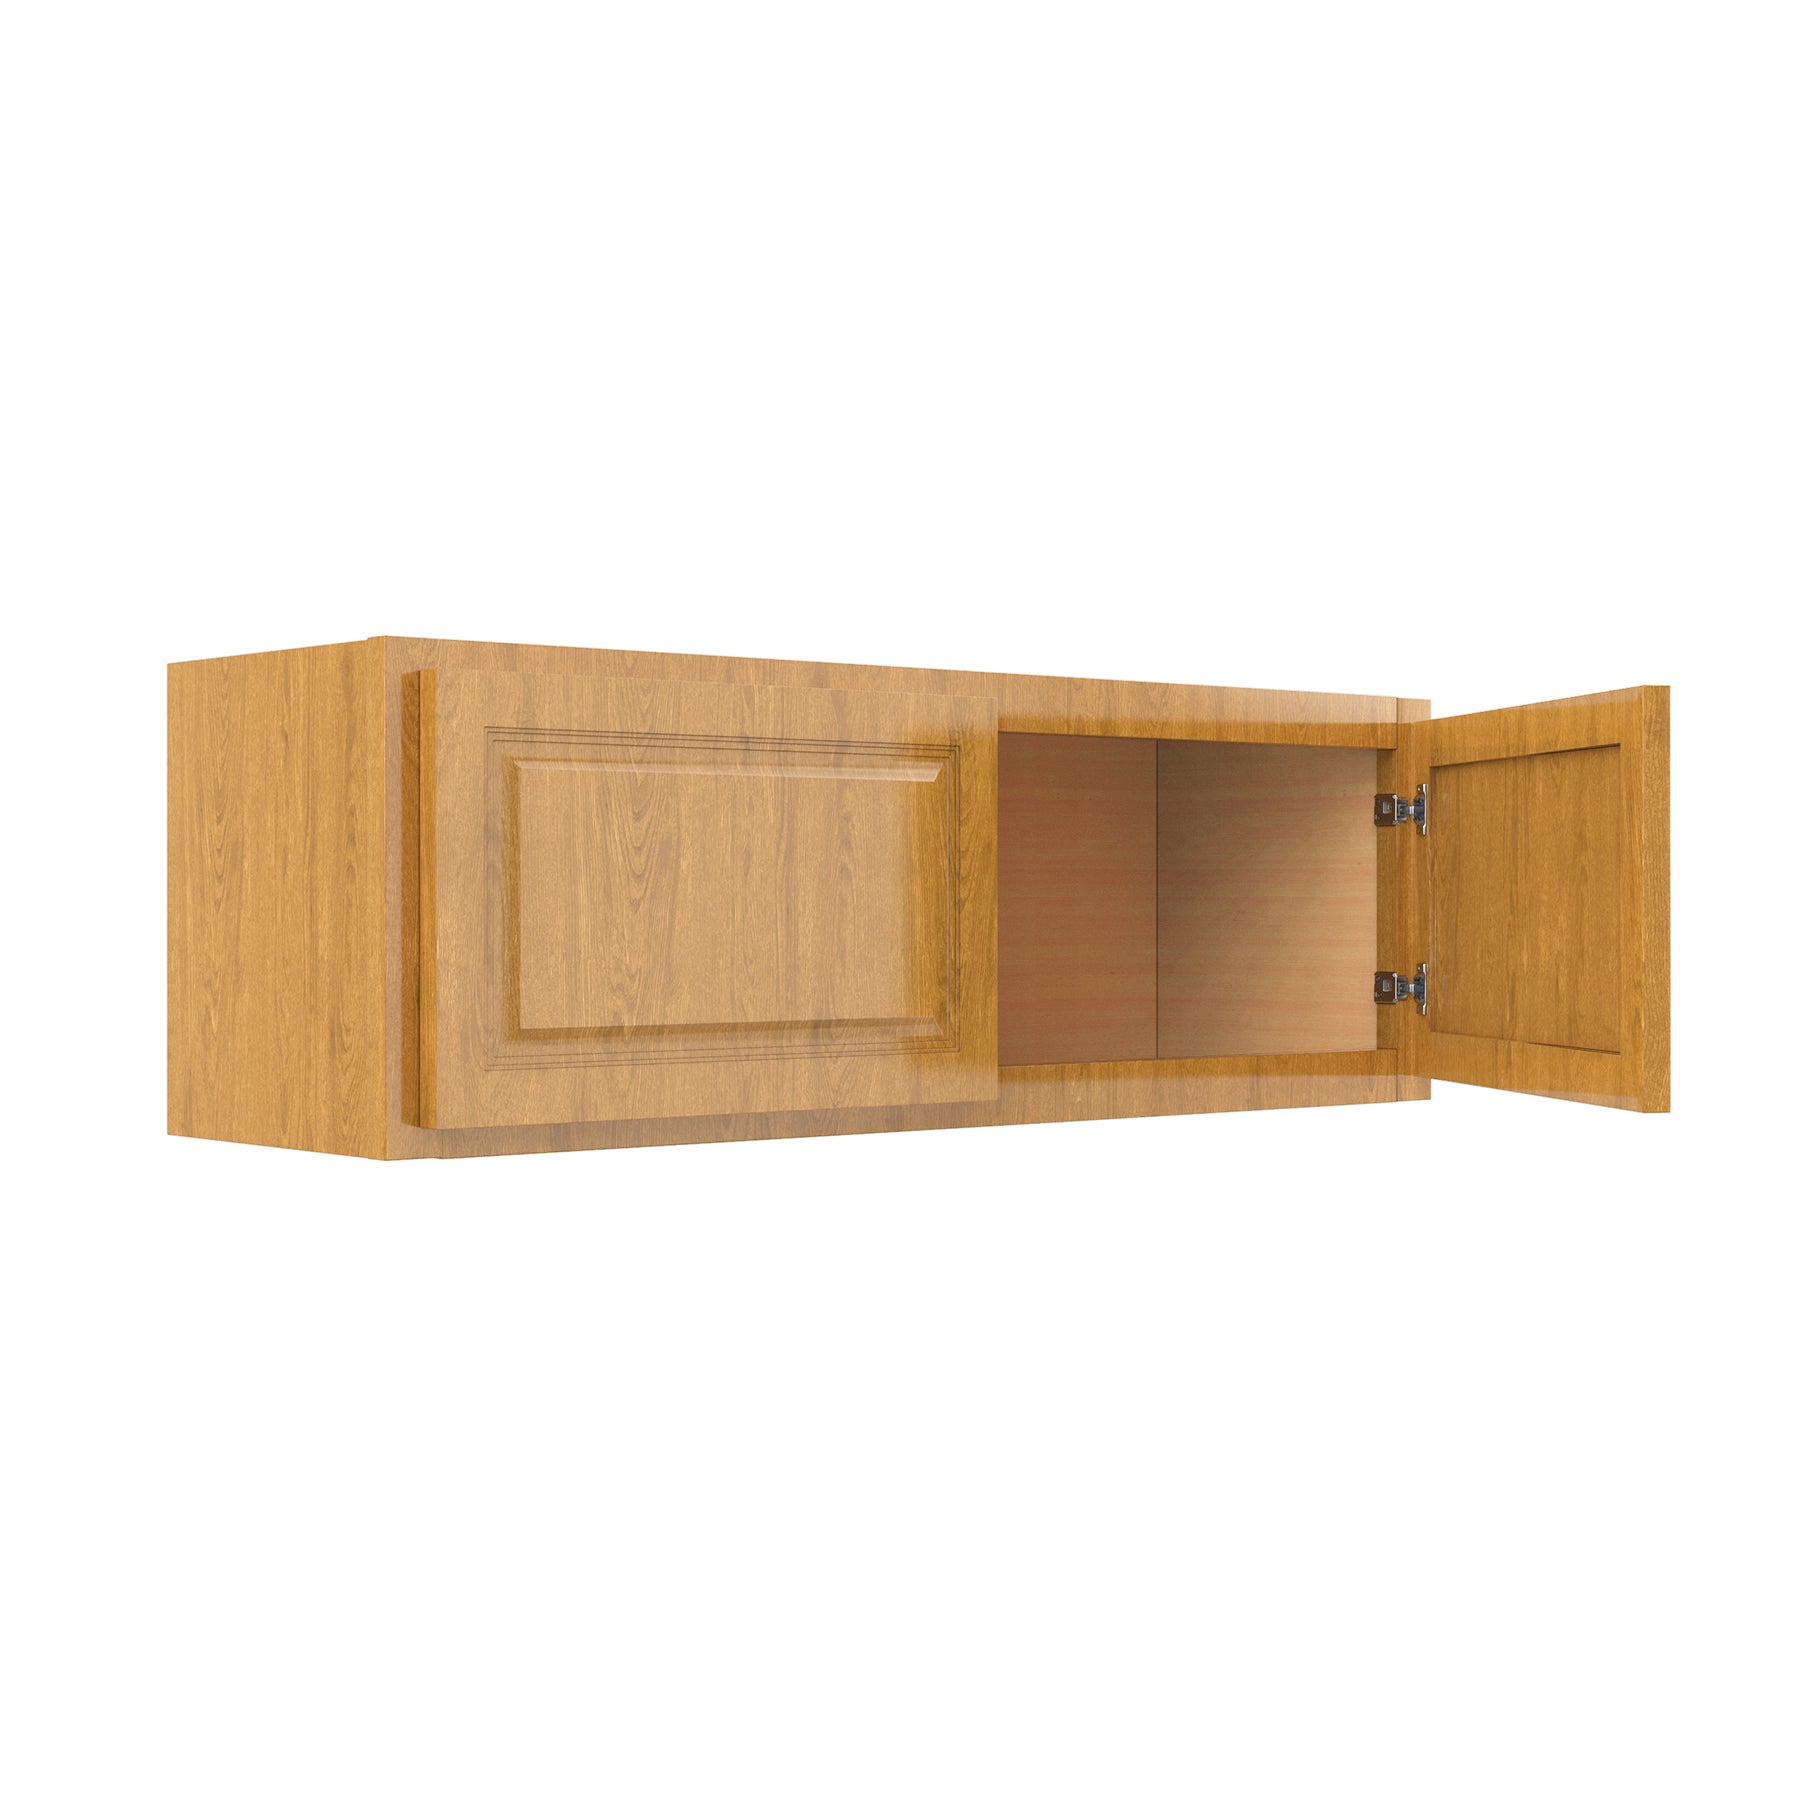 Country Oak 36"W x 12"H x 12"D Wall Cabinet